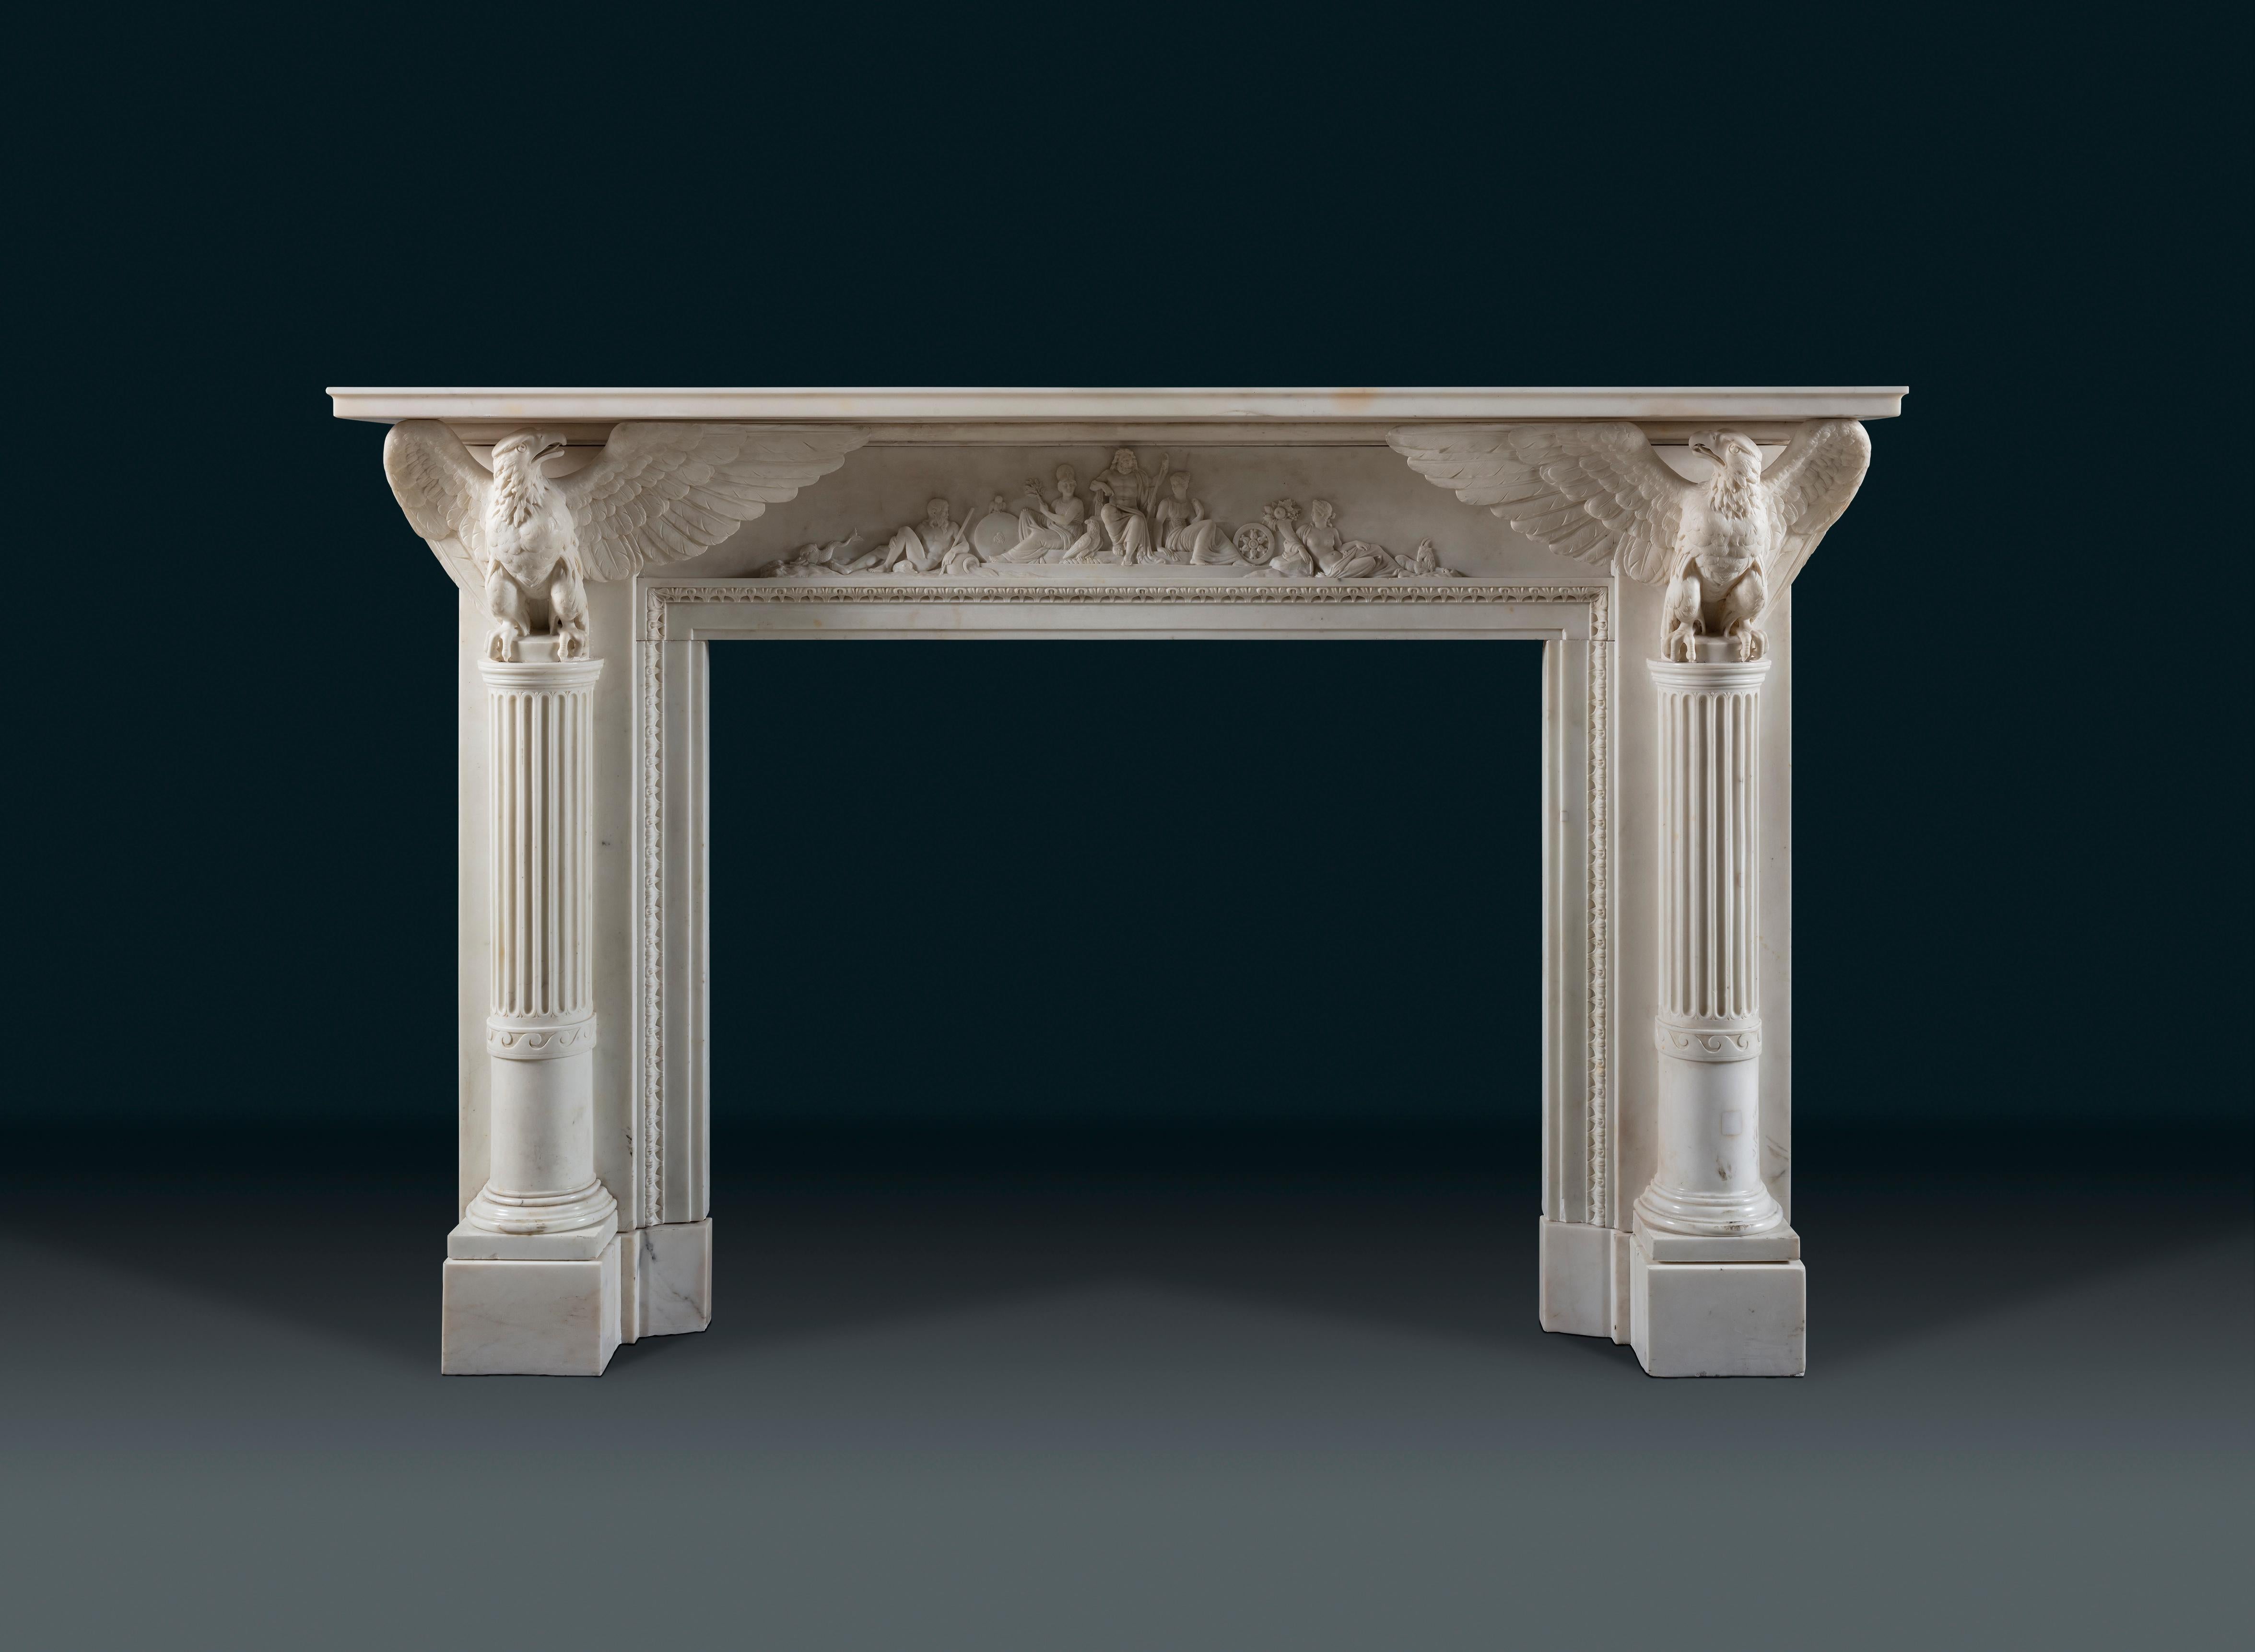 A magnificent early 19th Century statuary marble Irish chimneypiece carved by the Darley Brothers.
The subject of this piece celebrates Zeus, King of Olympus and the Greco-Roman Gods. The shelf upheld by magnificent Imperial eagles, which gesture